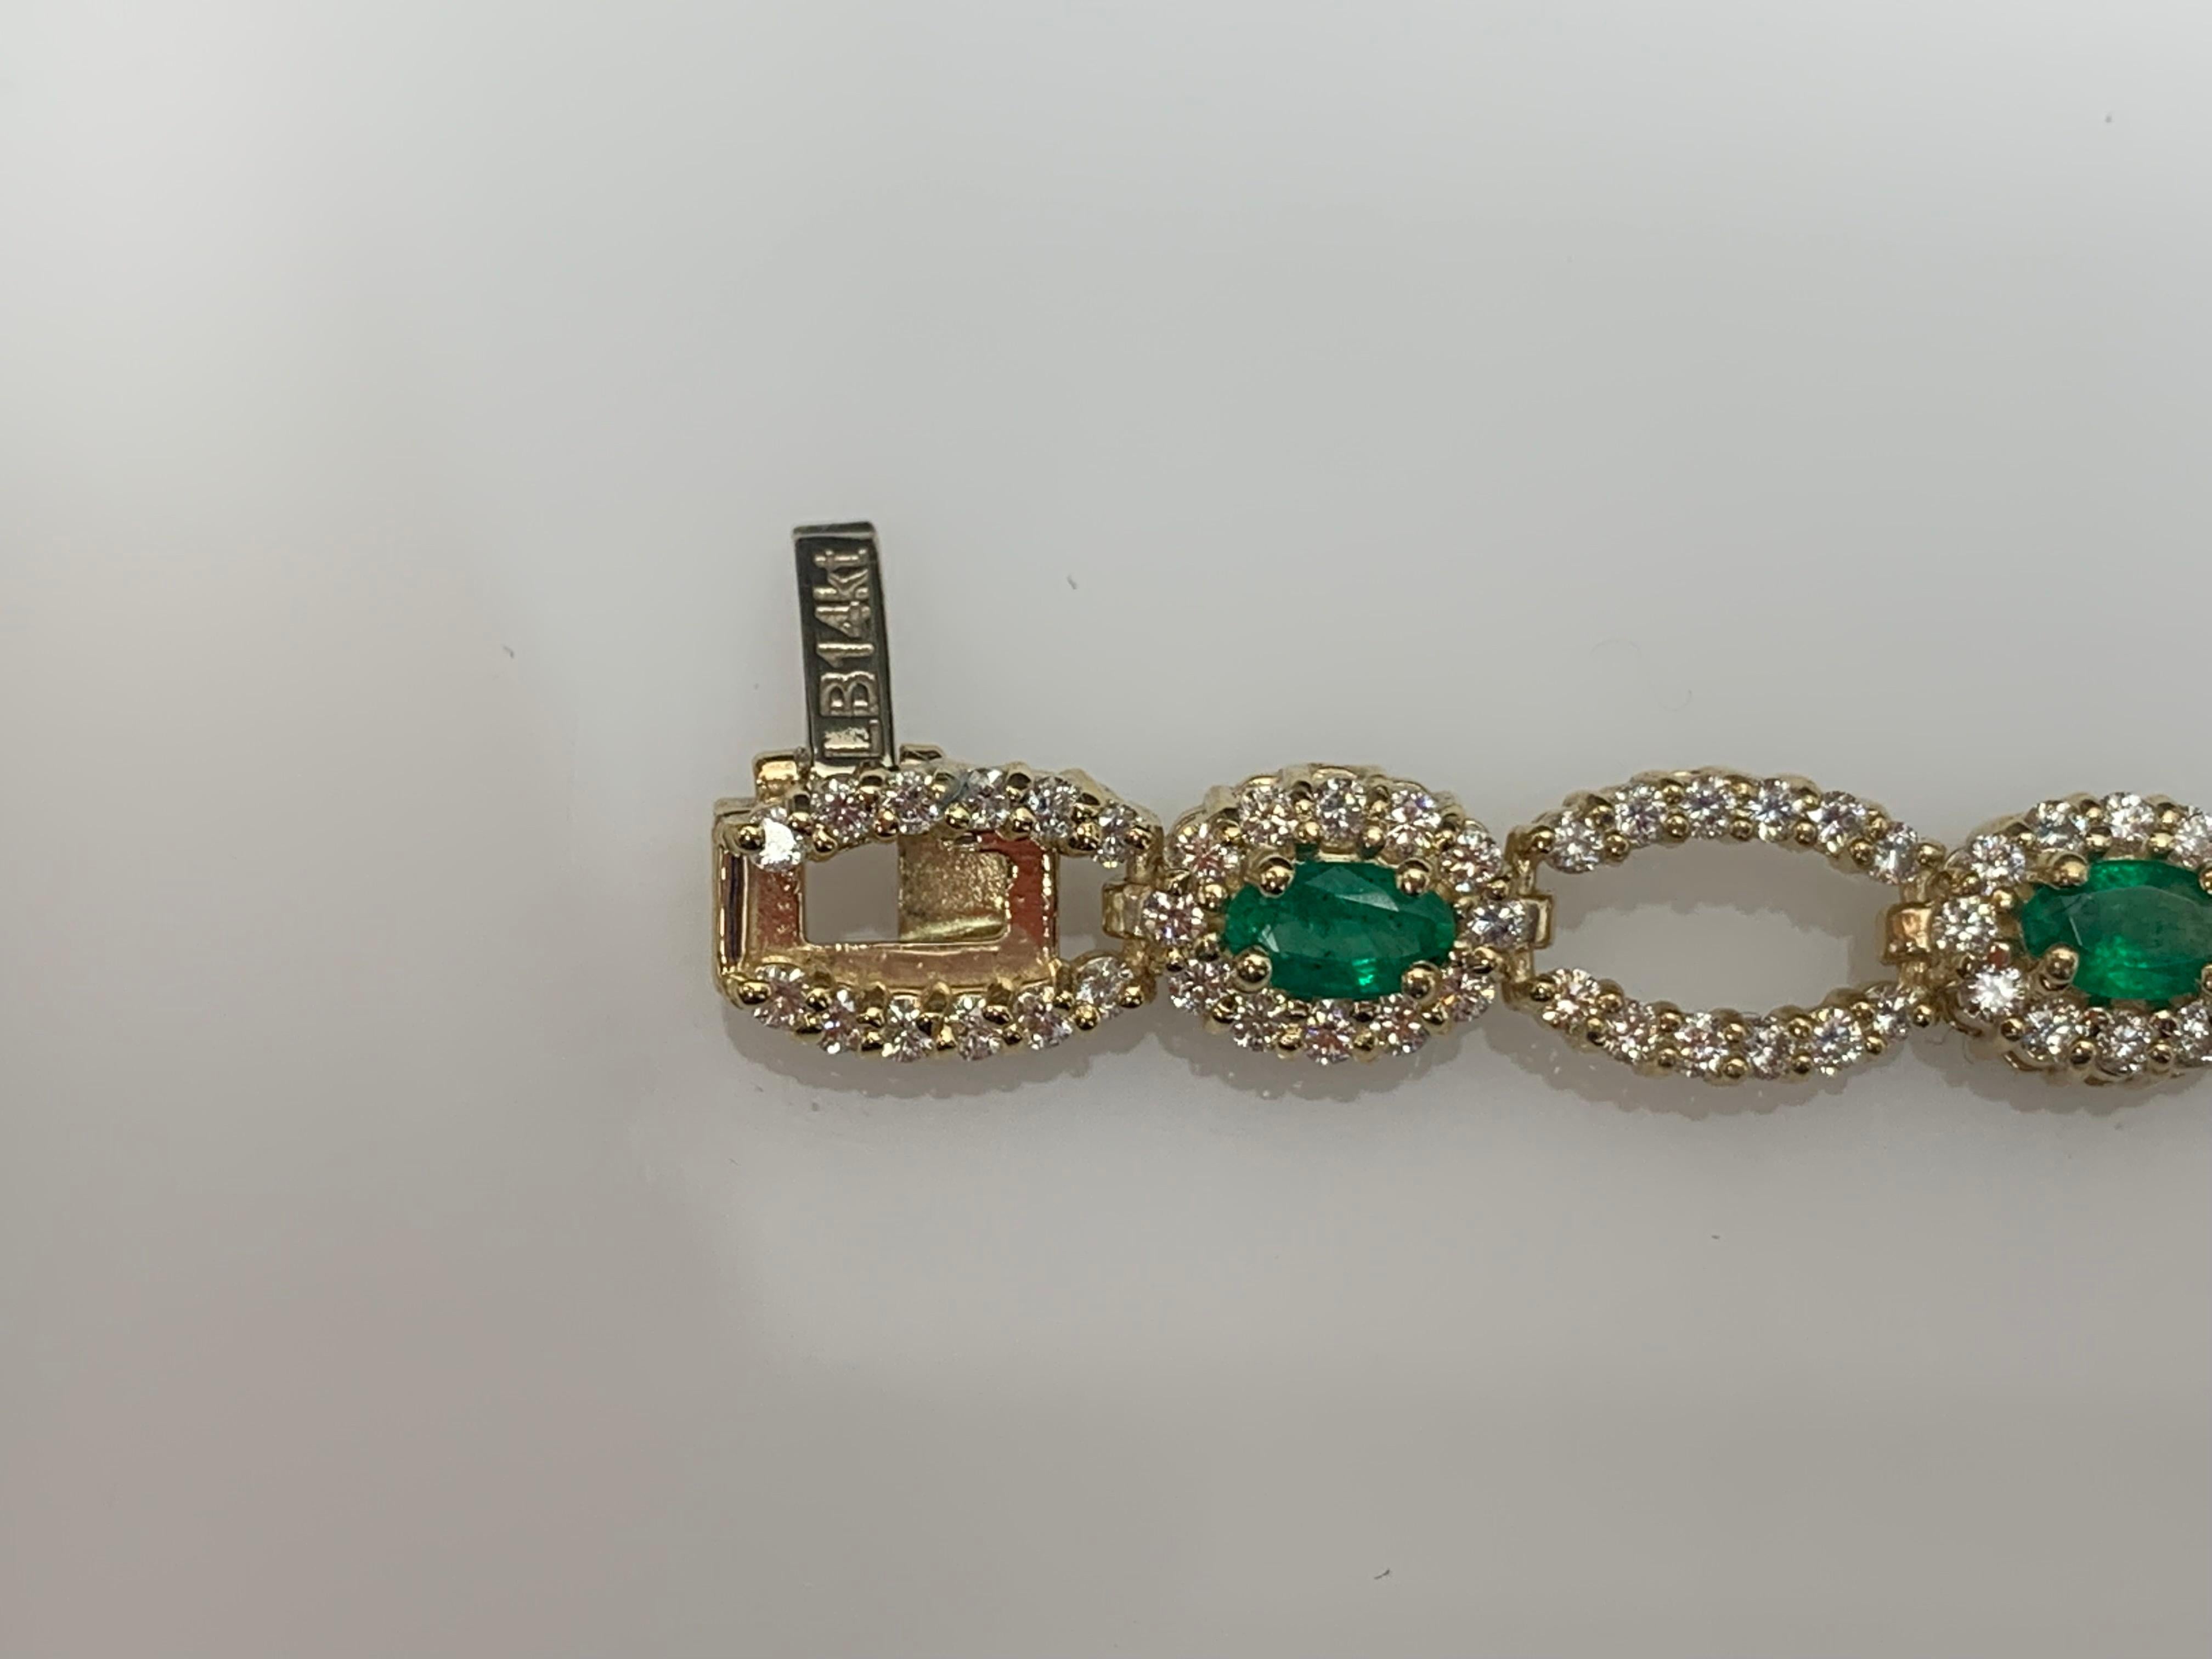 An antique Art Deco bracelet showcasing 10 oval cut emeralds weighing 2.13 carats. Surrounding the emeralds is a row of brilliant cut diamonds, set in an intricate open-work design made in 14k yellow gold. 240 Accent Diamonds weigh 2.85 carats